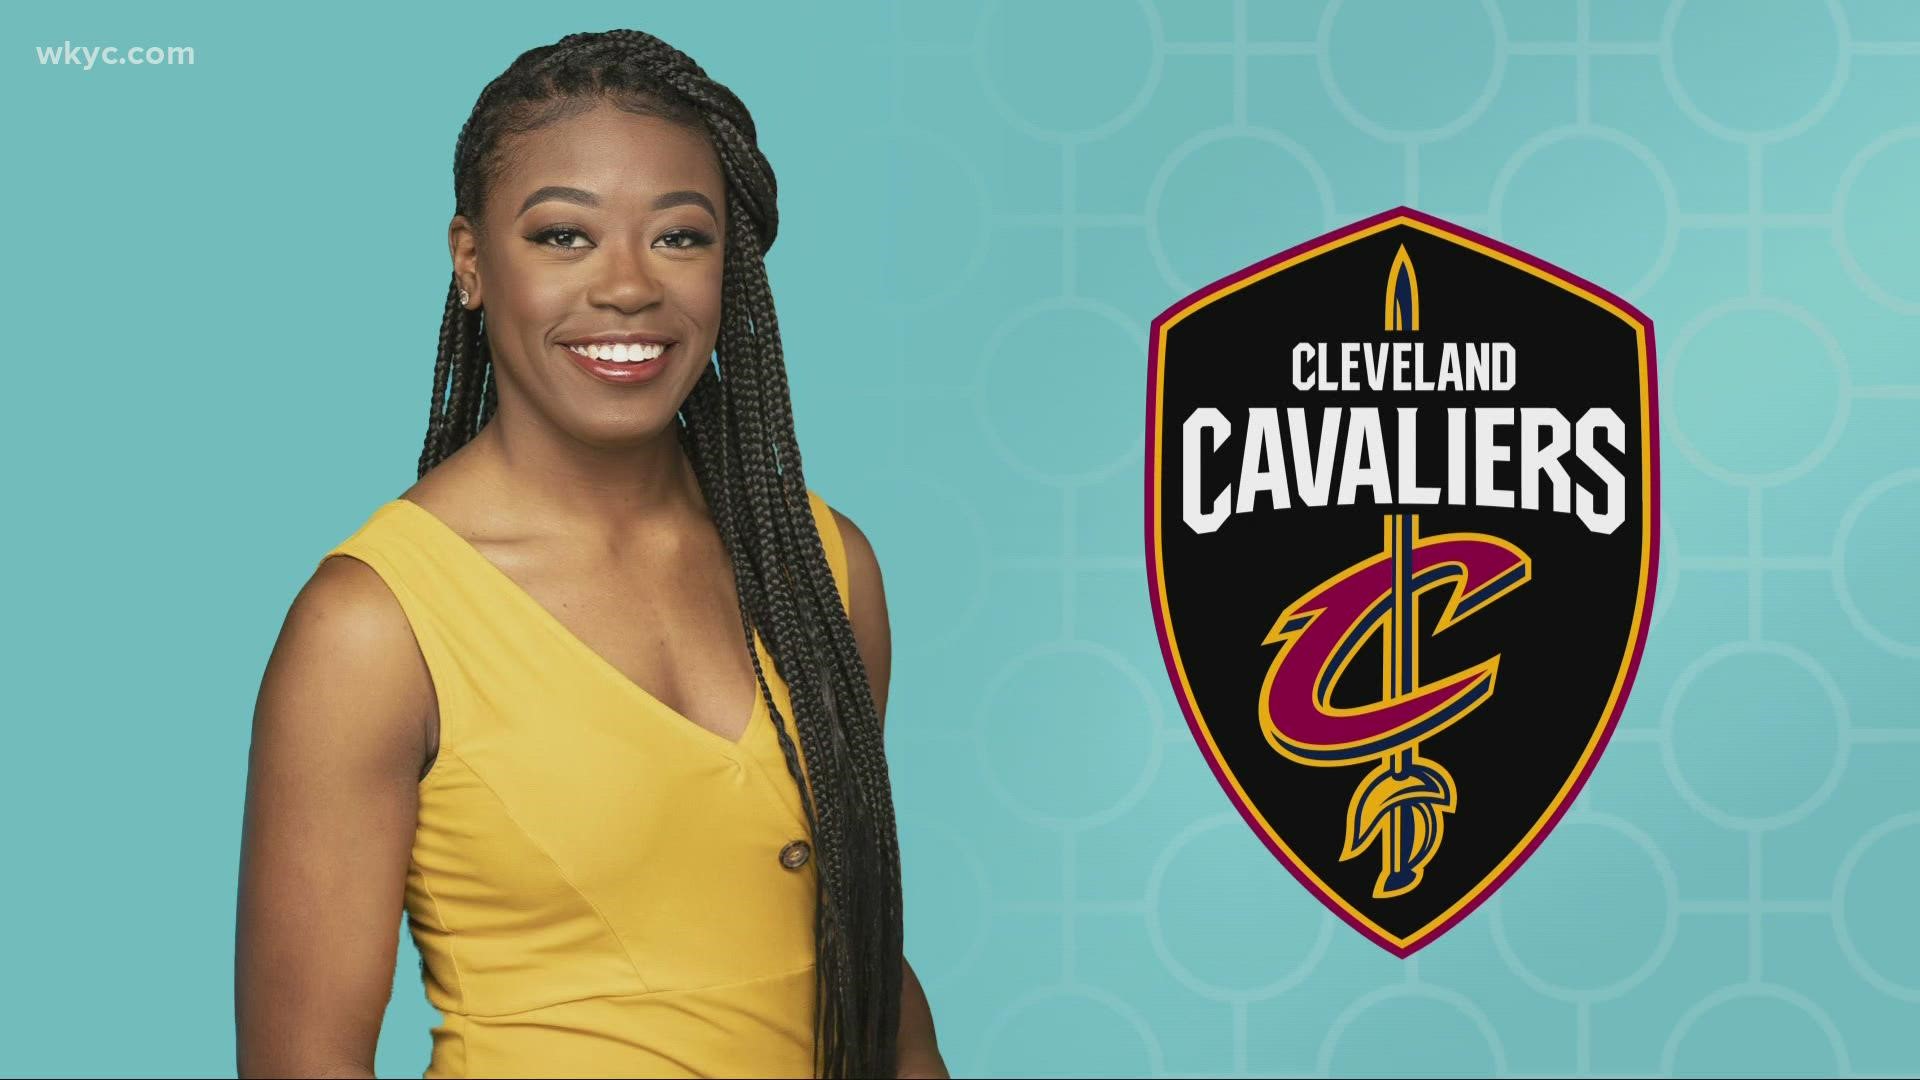 Kierra is expanding her horizon. She's not leaving, but if you're going to a Cavs game--be on the lookout for the newest in-game host.